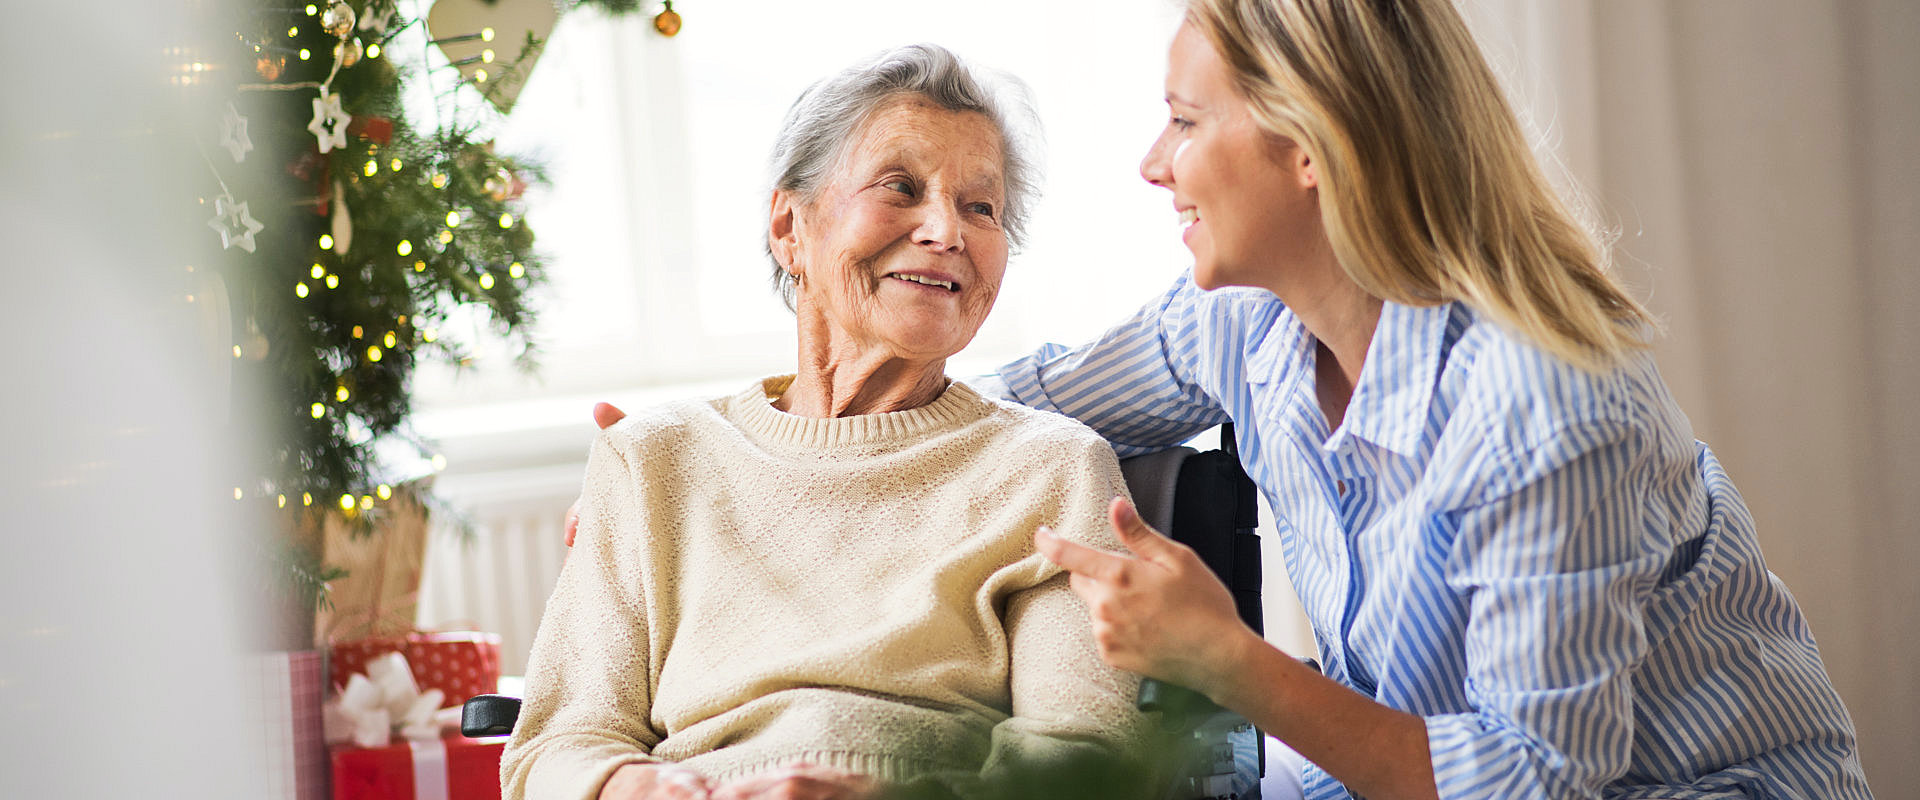 caregiver talking with her senior patient